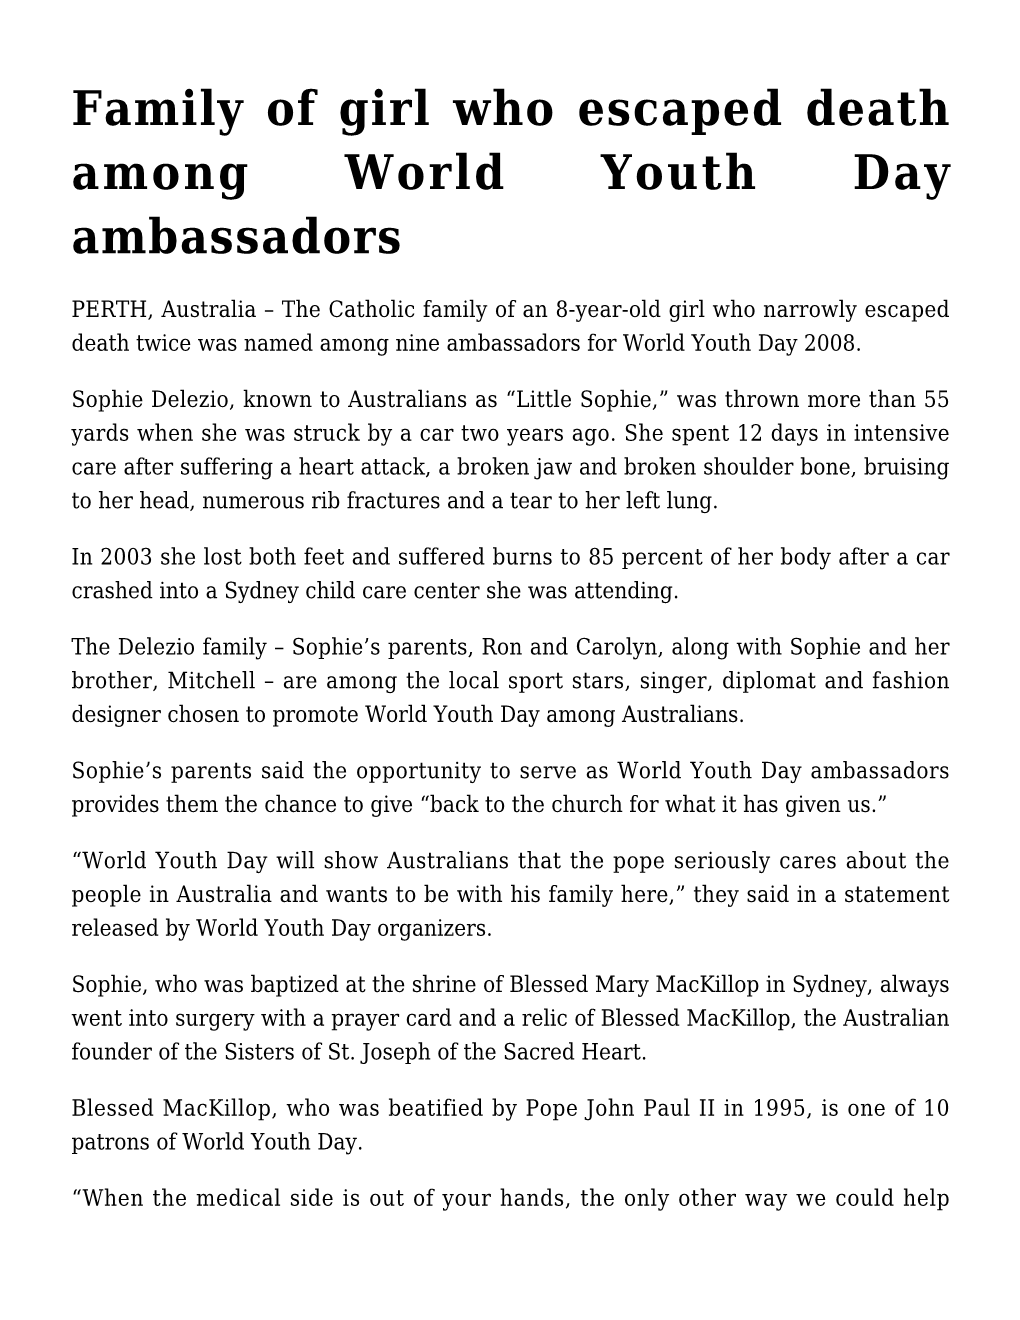 Family of Girl Who Escaped Death Among World Youth Day Ambassadors